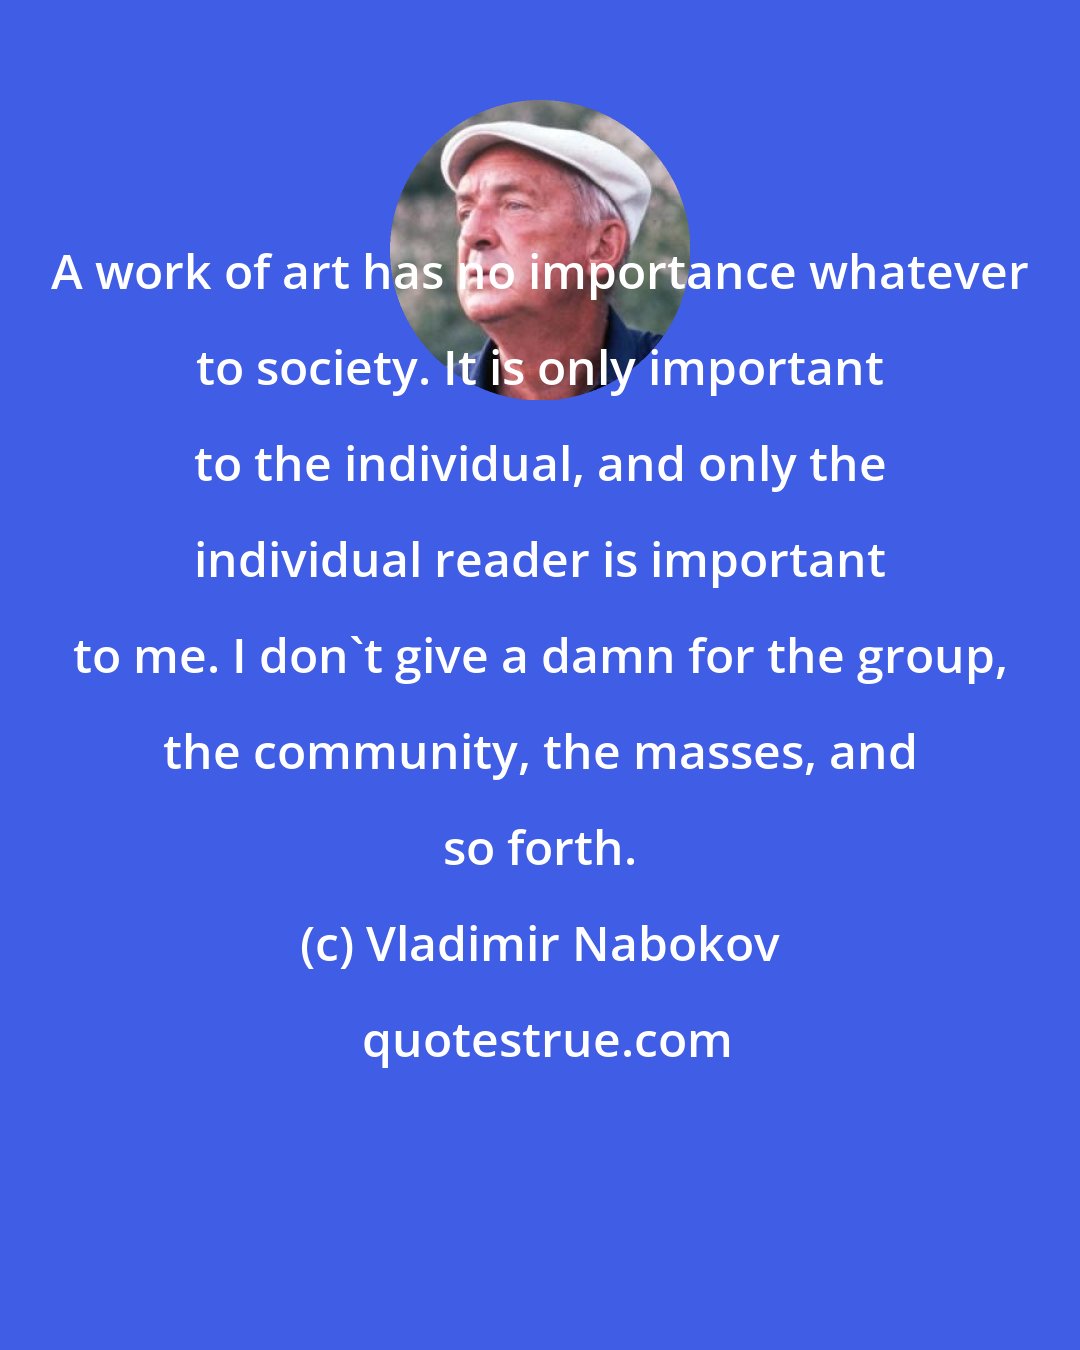 Vladimir Nabokov: A work of art has no importance whatever to society. It is only important to the individual, and only the individual reader is important to me. I don't give a damn for the group, the community, the masses, and so forth.